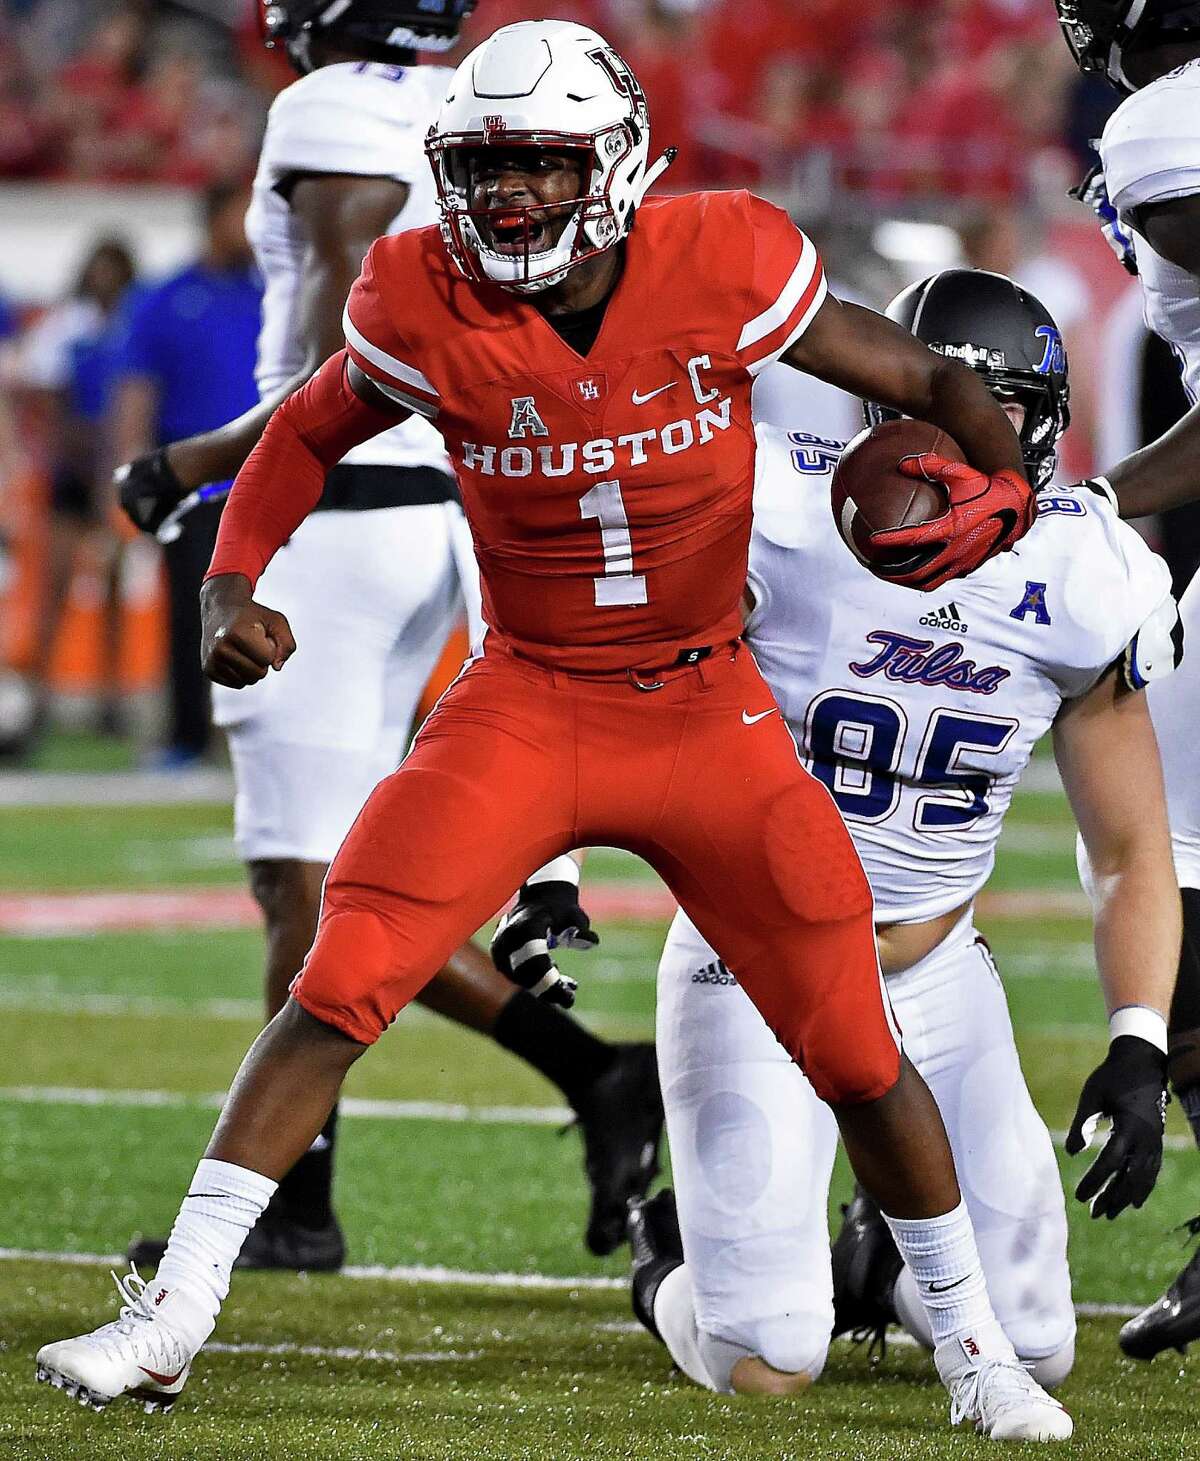 Houston quarterback Greg Ward Jr. (1) celebrates a first down in the first half of an NCAA college football game against Tulsa, Saturday, Oct. 15, 2016, in Houston. (AP Photo/Eric Christian Smith)